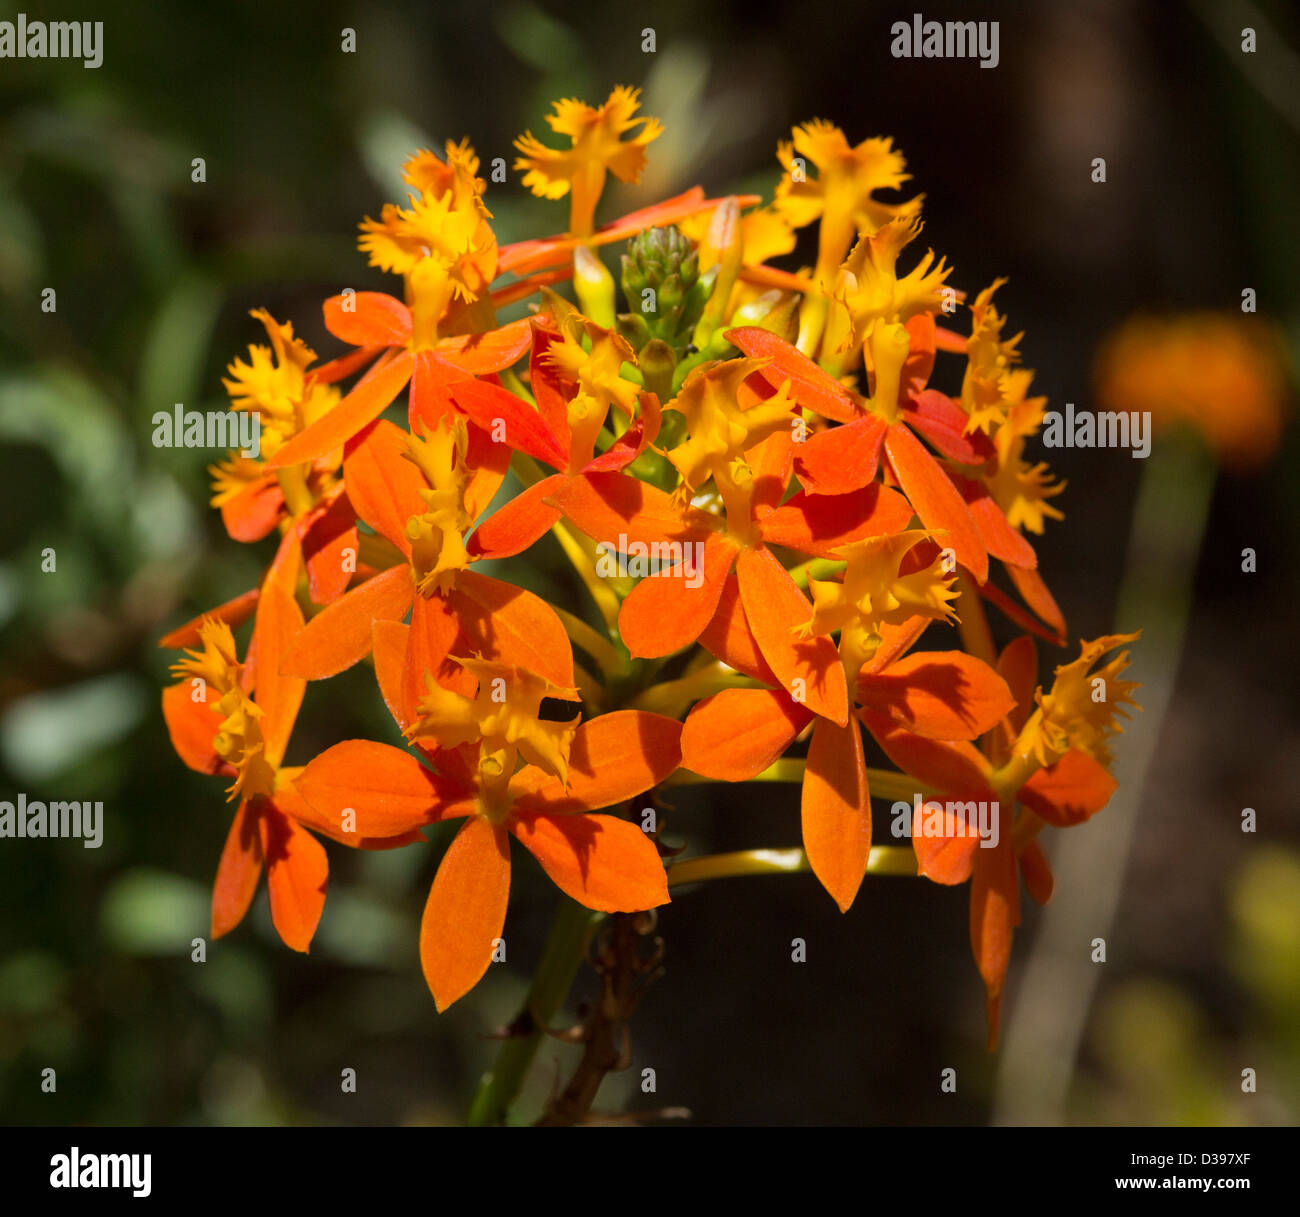 Cluster of bright orange flowers of Epidendrum ibaguense - crucifix orchid - against a dark background Stock Photo